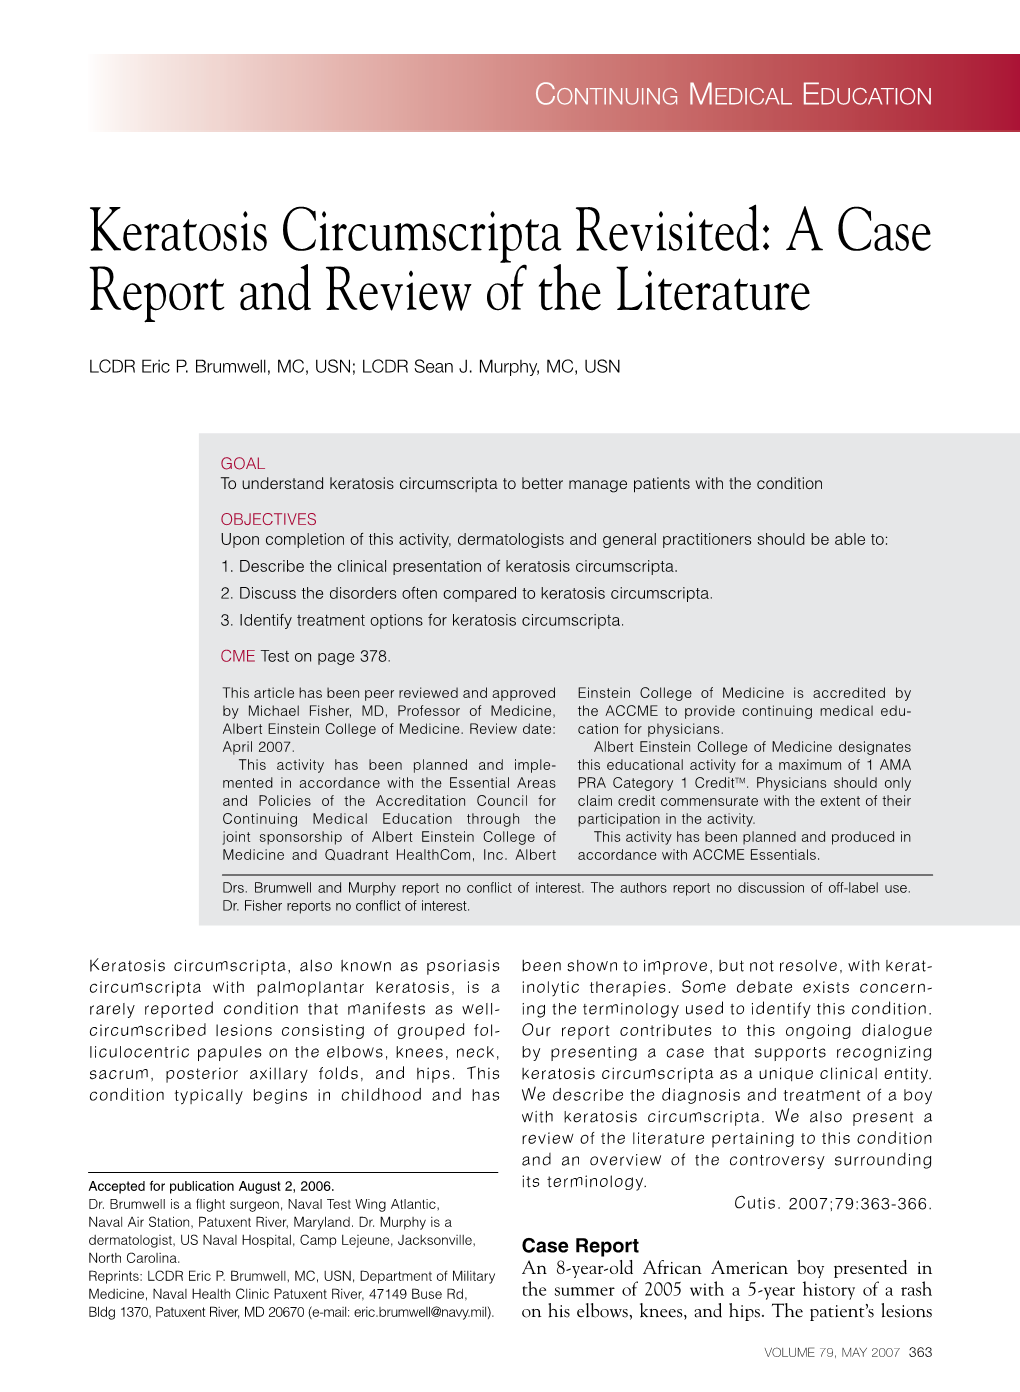 Keratosis Circumscripta Revisited: a Case Report and Review of the Literature